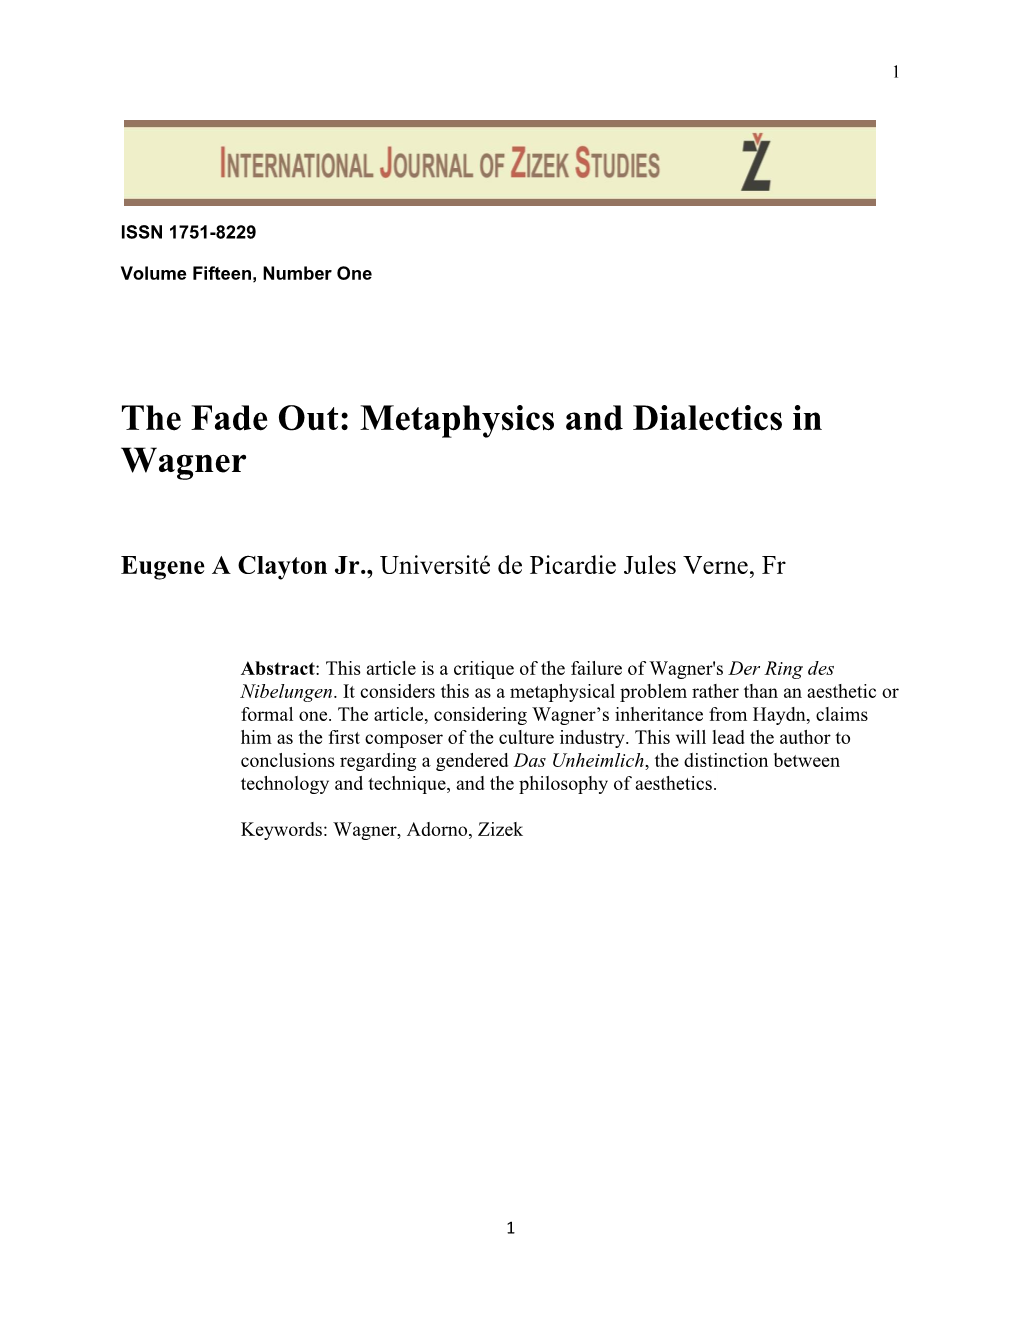 The Fade Out: Metaphysics and Dialectics in Wagner